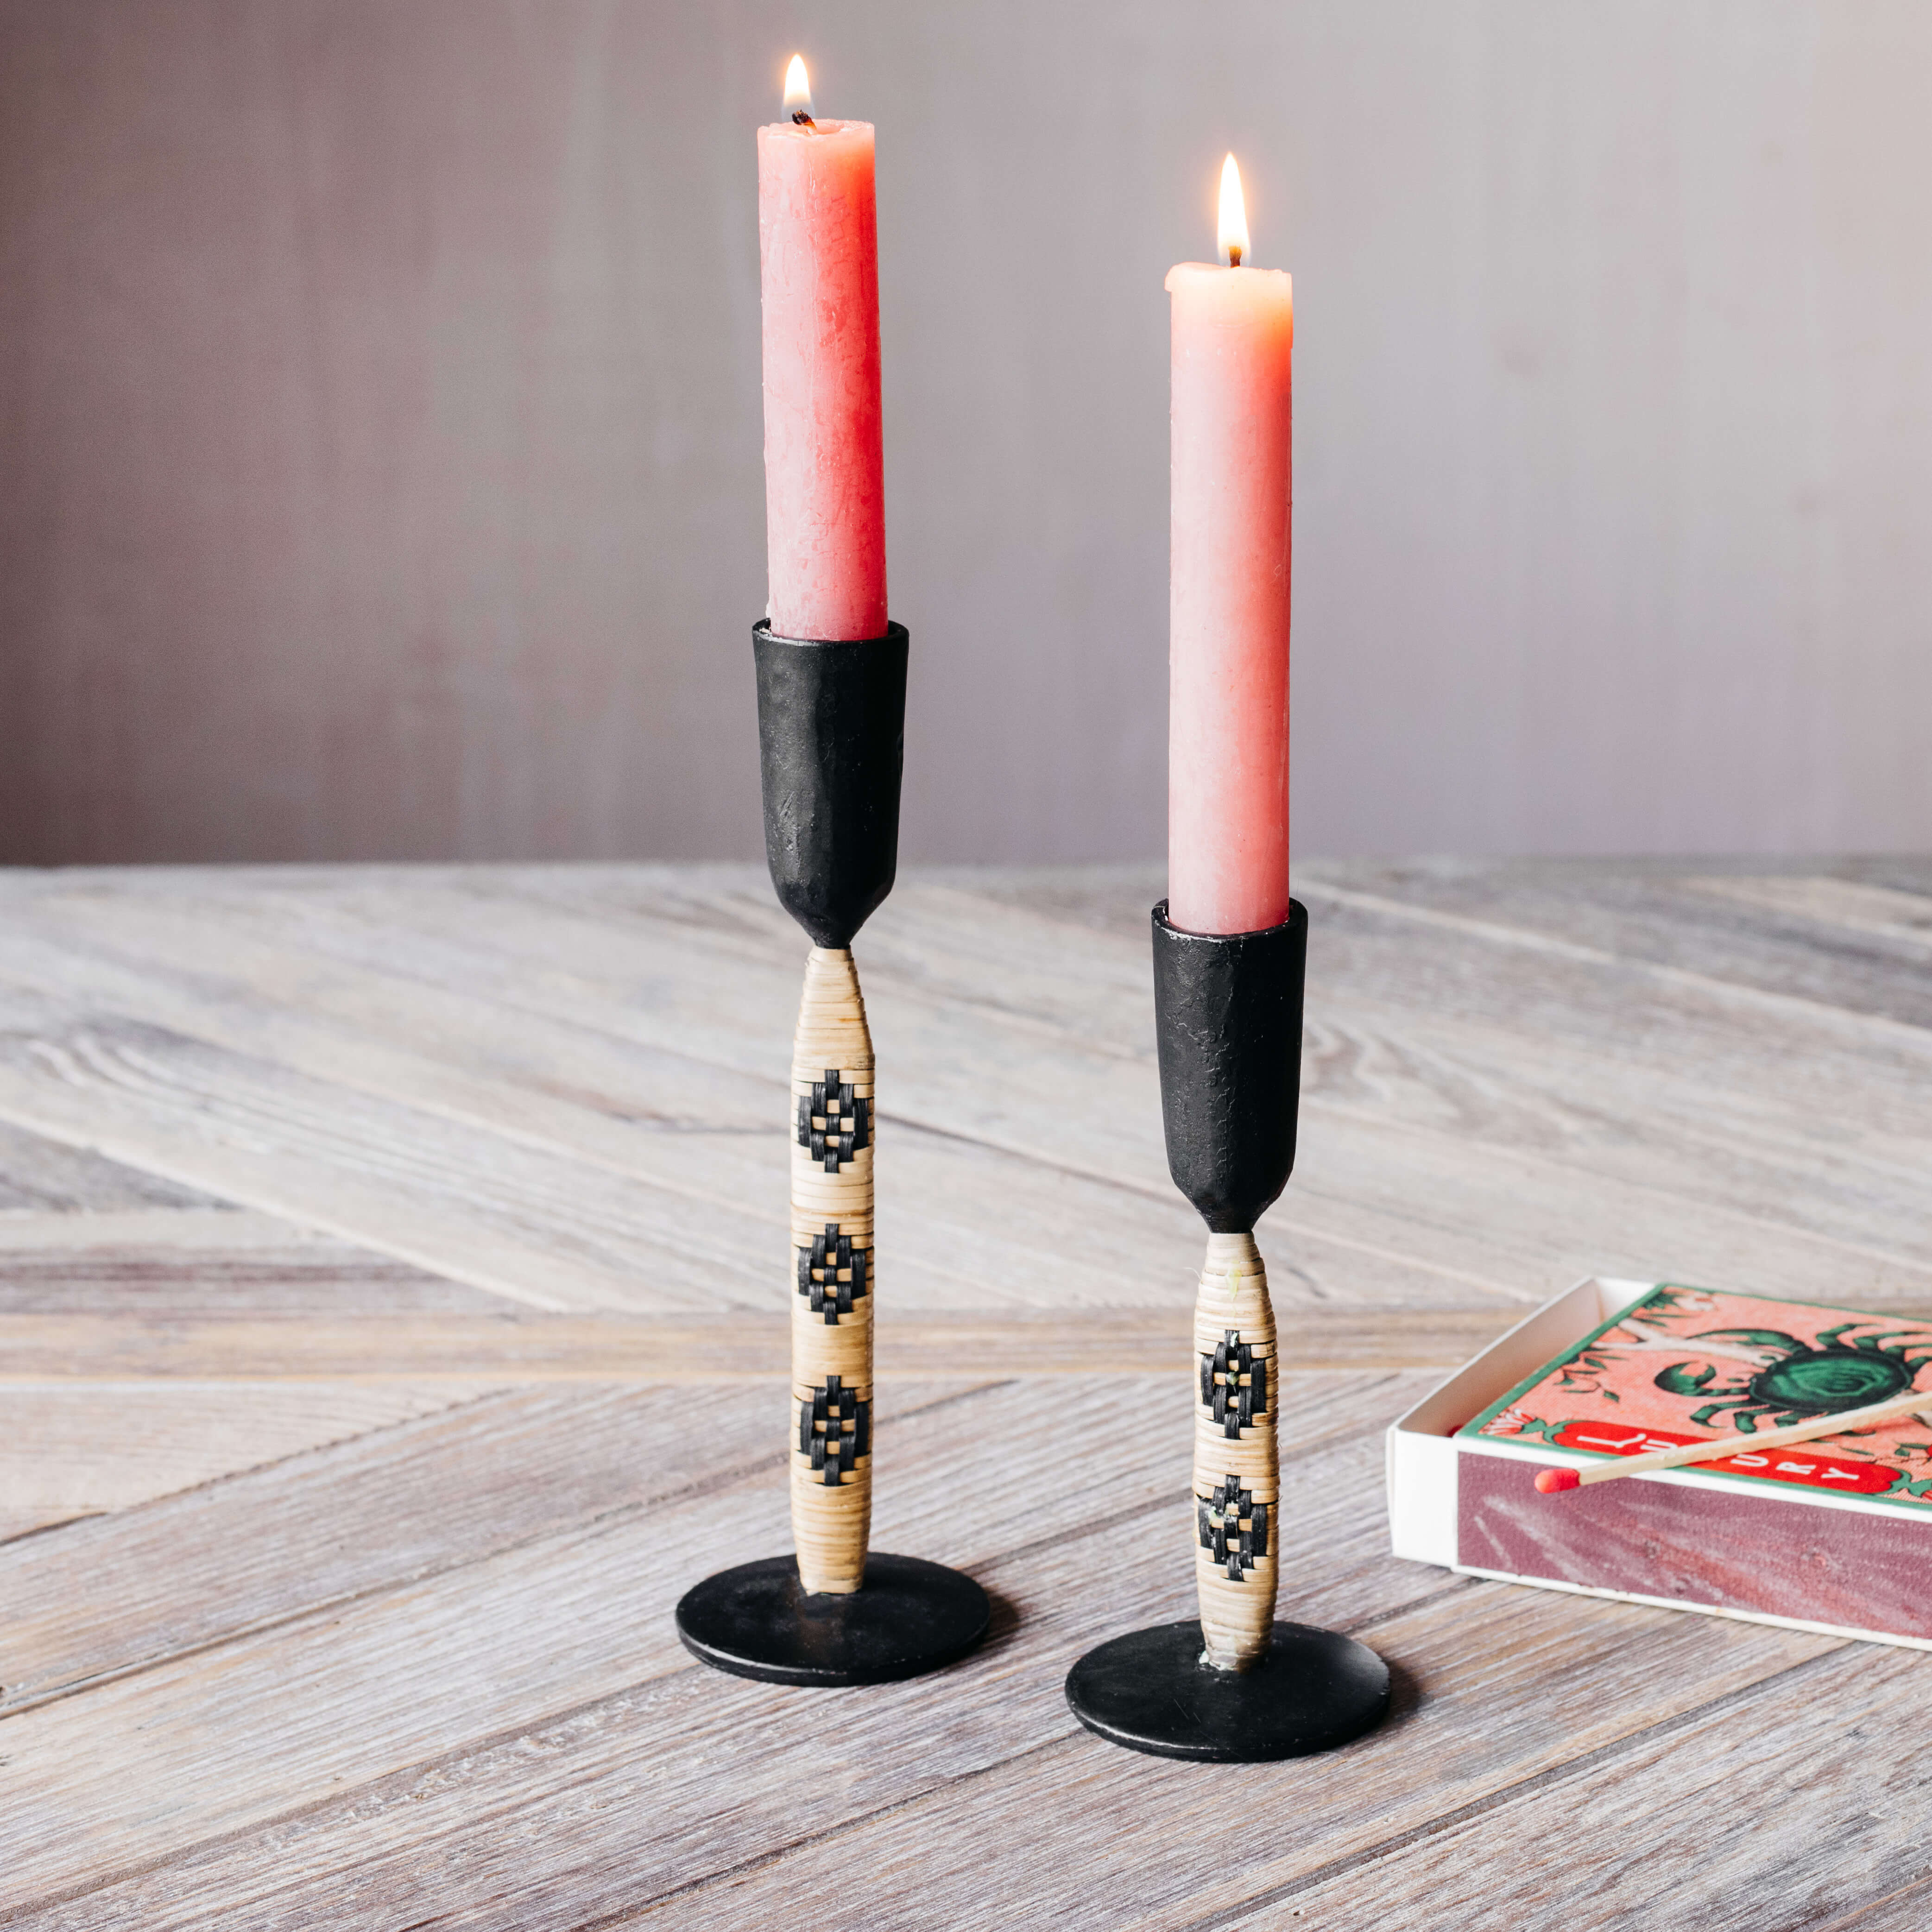 Graham and Green Set of Two Black Bamboo Candle Holders - image 1